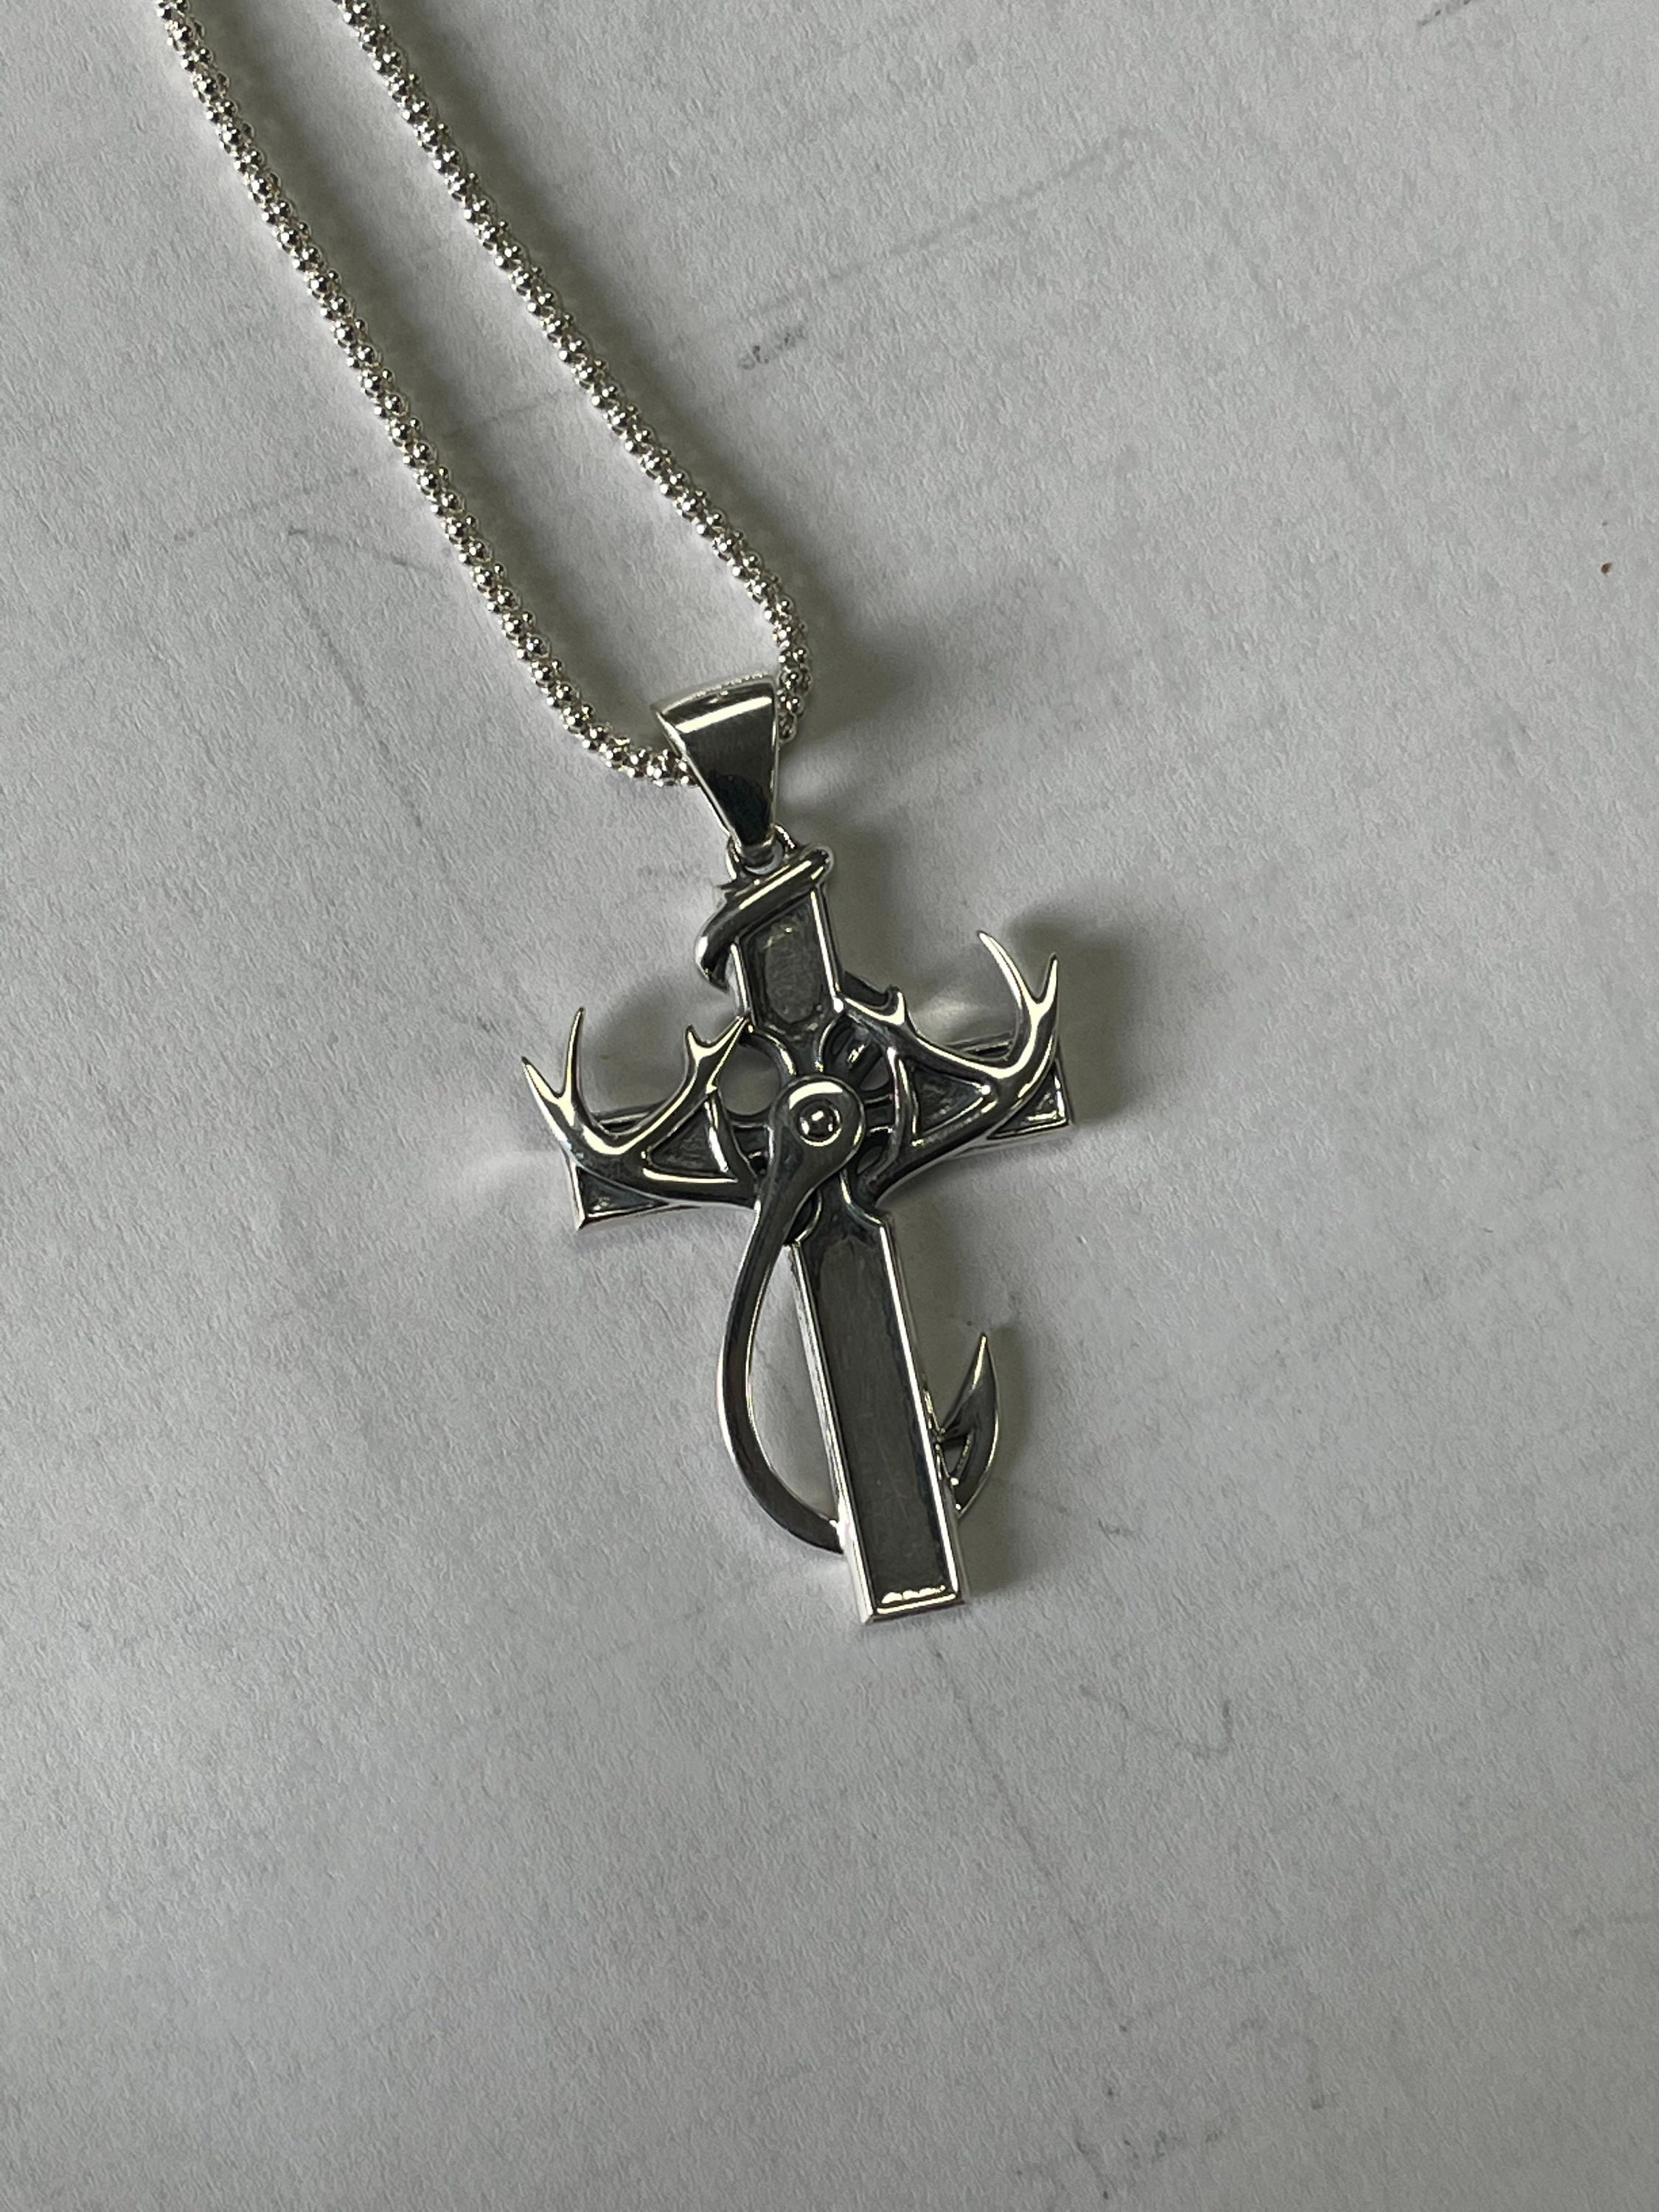 Necklace Sterling Silver Cross , Hunting Faith and Fishing Jewelry